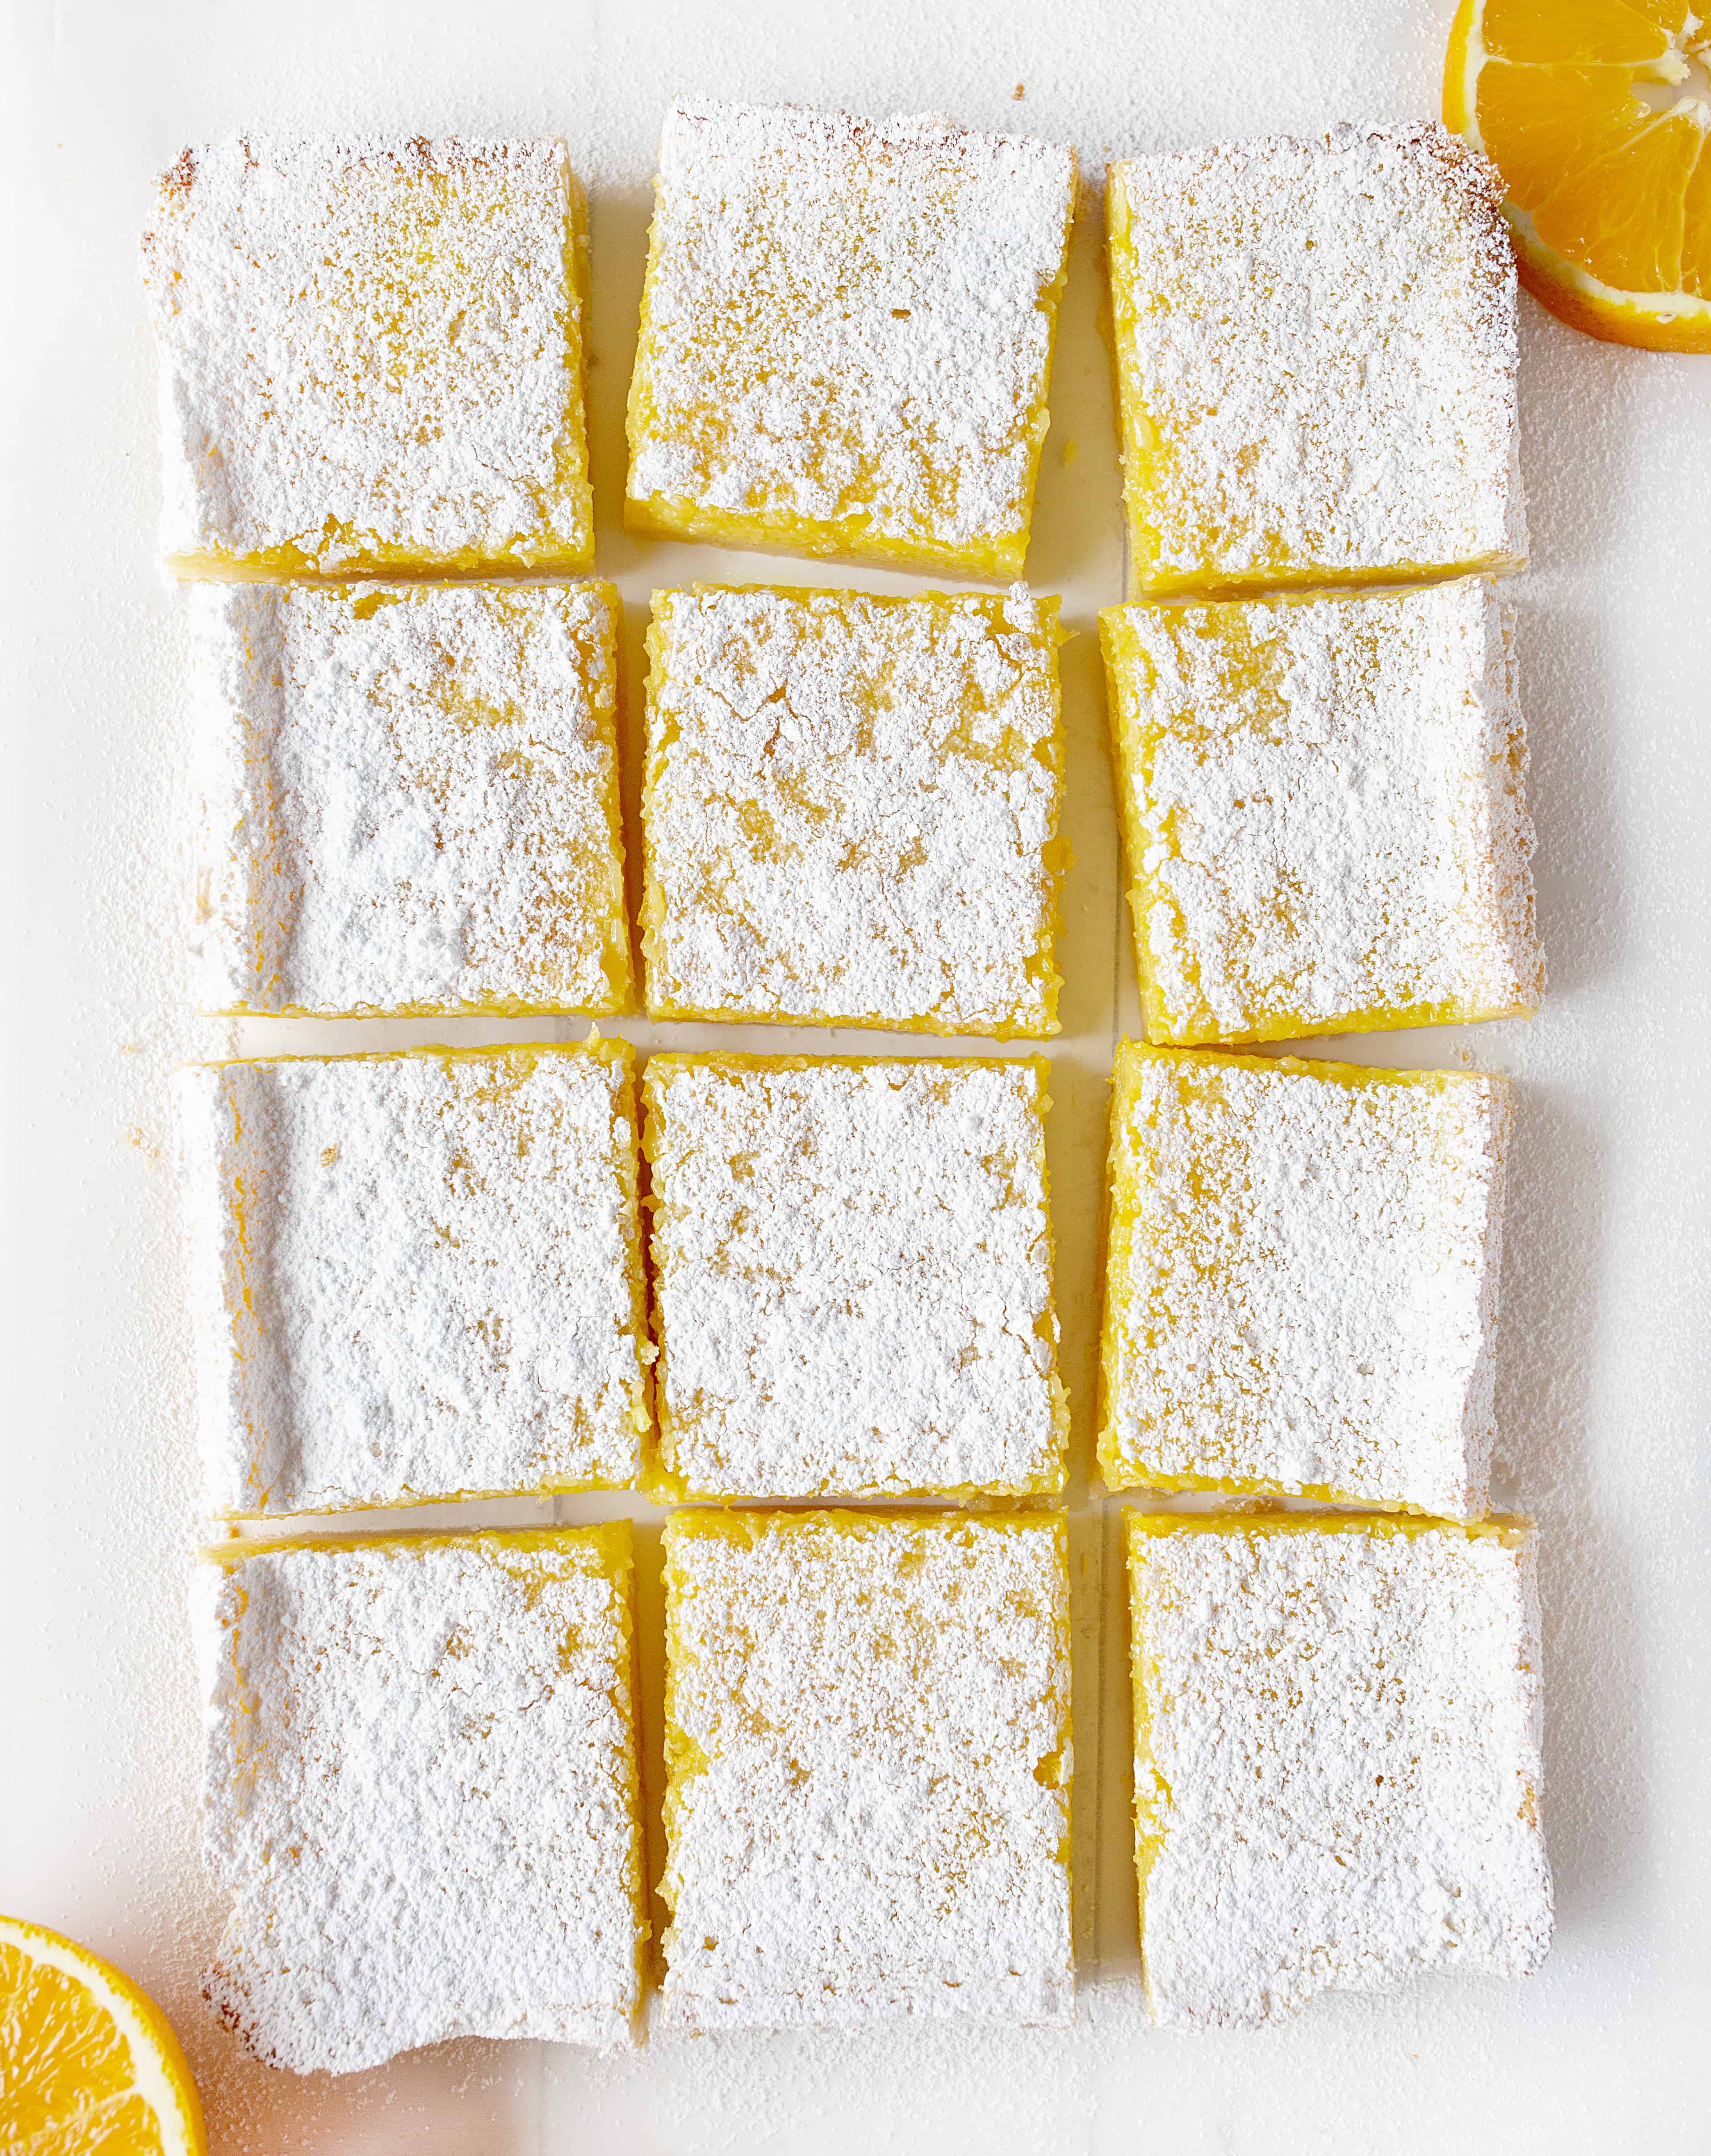 Orange Bars From OVerhead Cut Up Into Squares and dusted in Confectioners Sugar. 